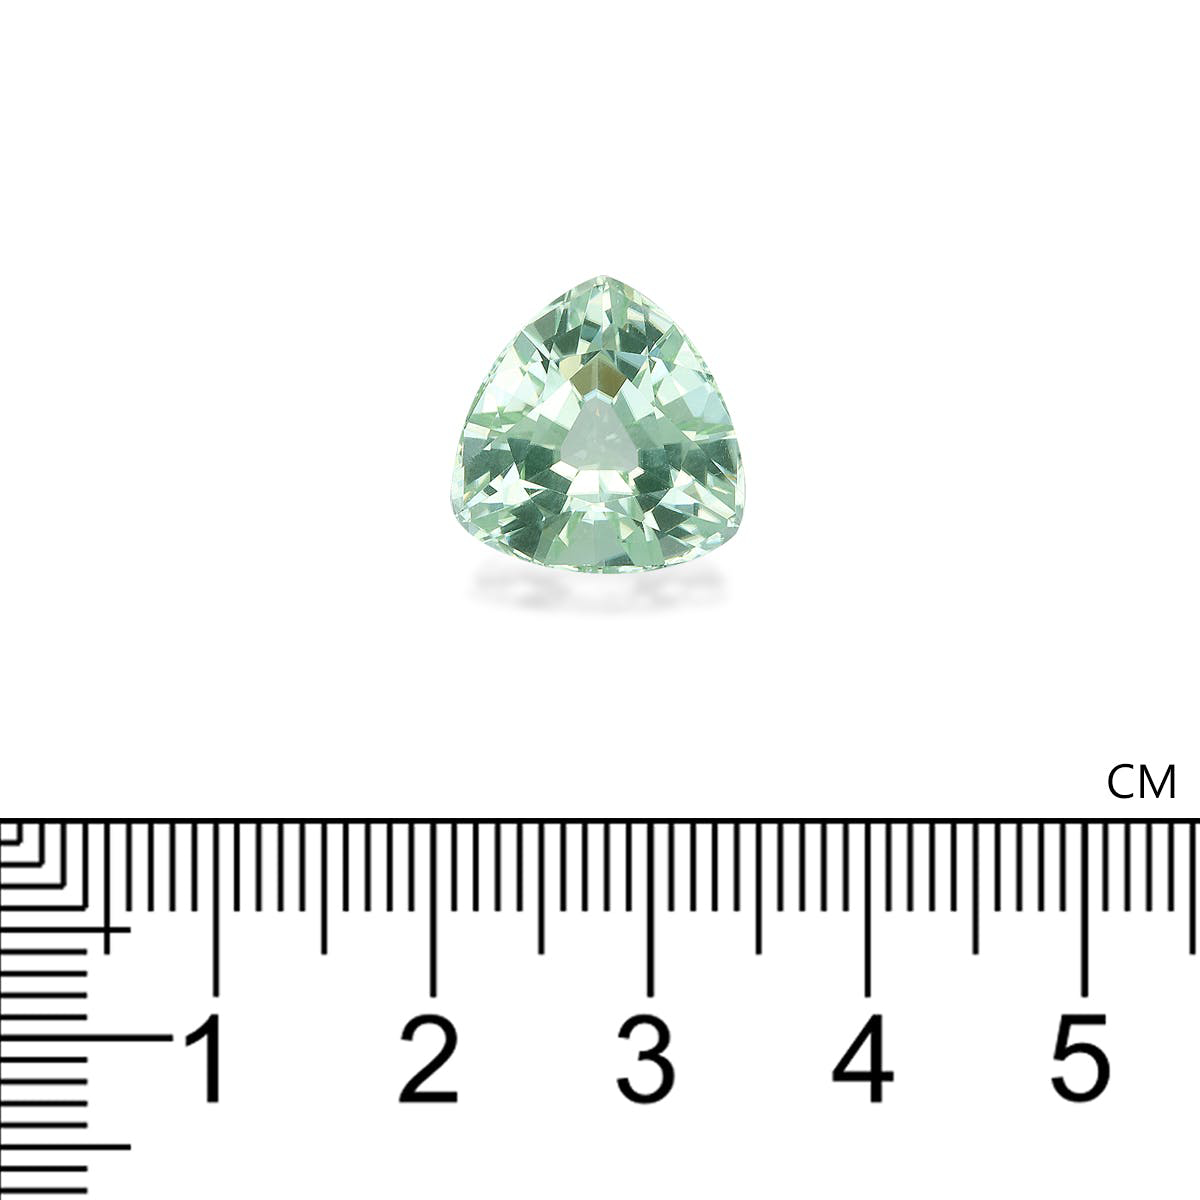 Picture of Mist Green Tourmaline 10.23ct - 13mm (TG1546)